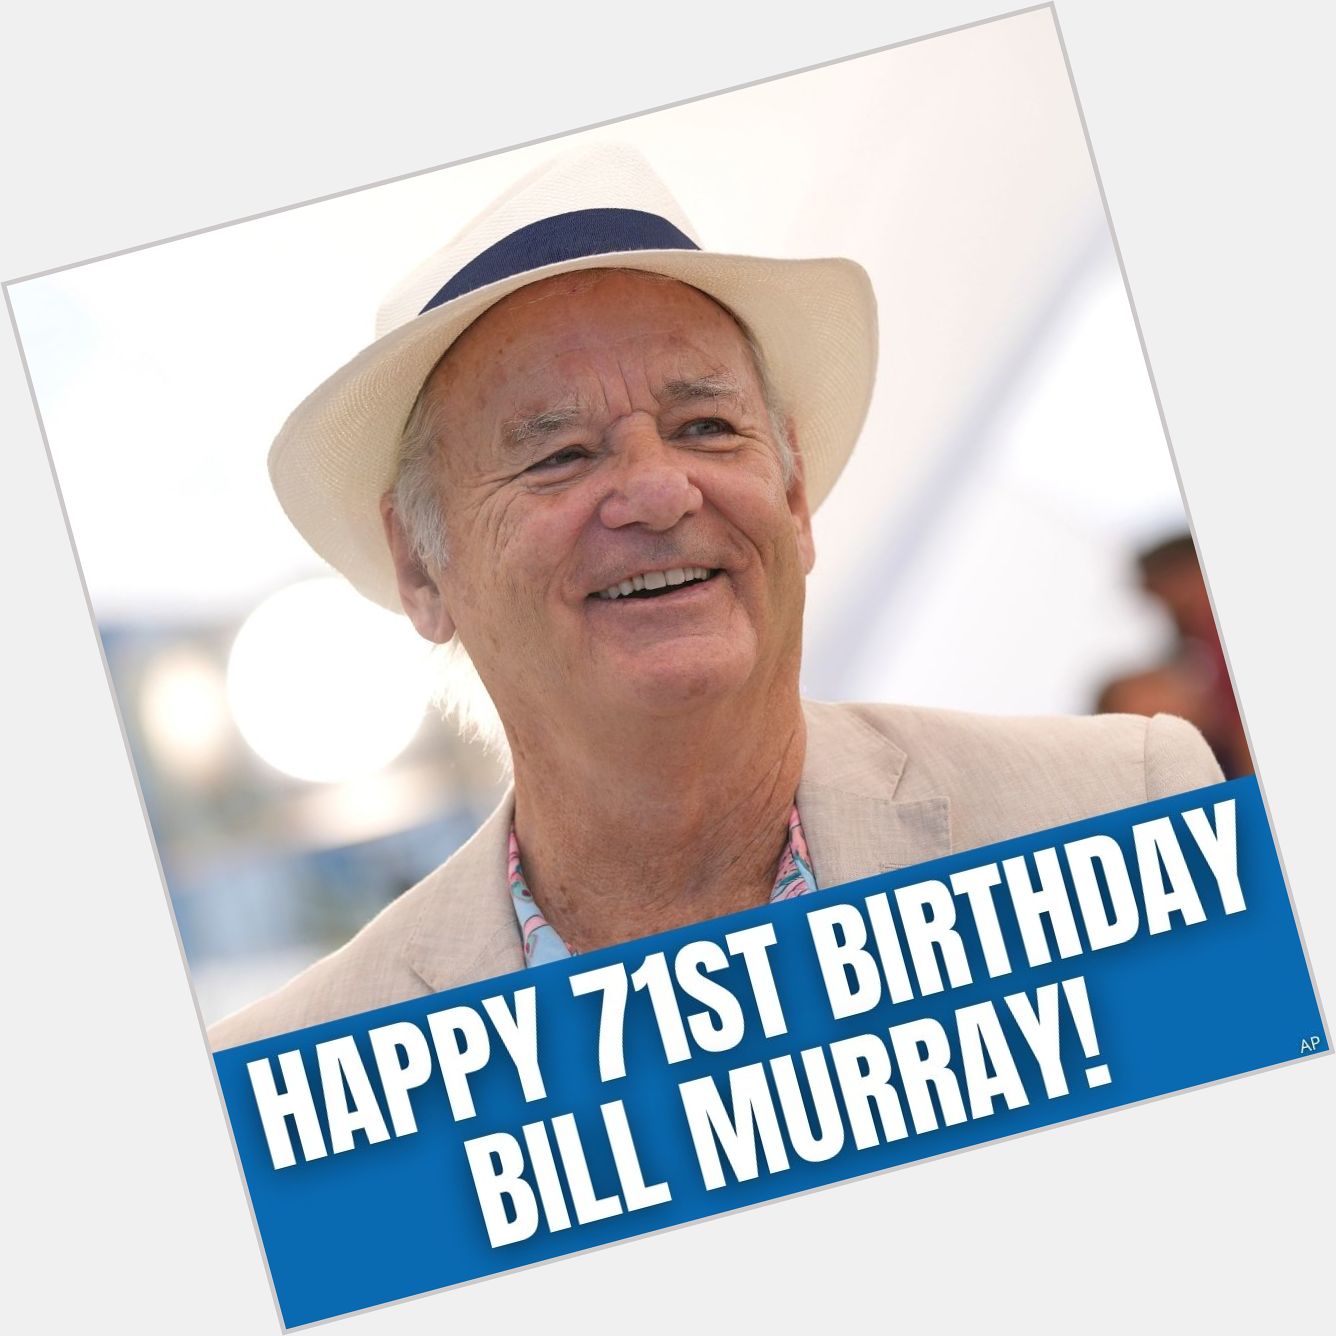    HAPPY BIRTHDAY! The comedy legend is 71 today! What\s your favorite Bill Murray movie?  